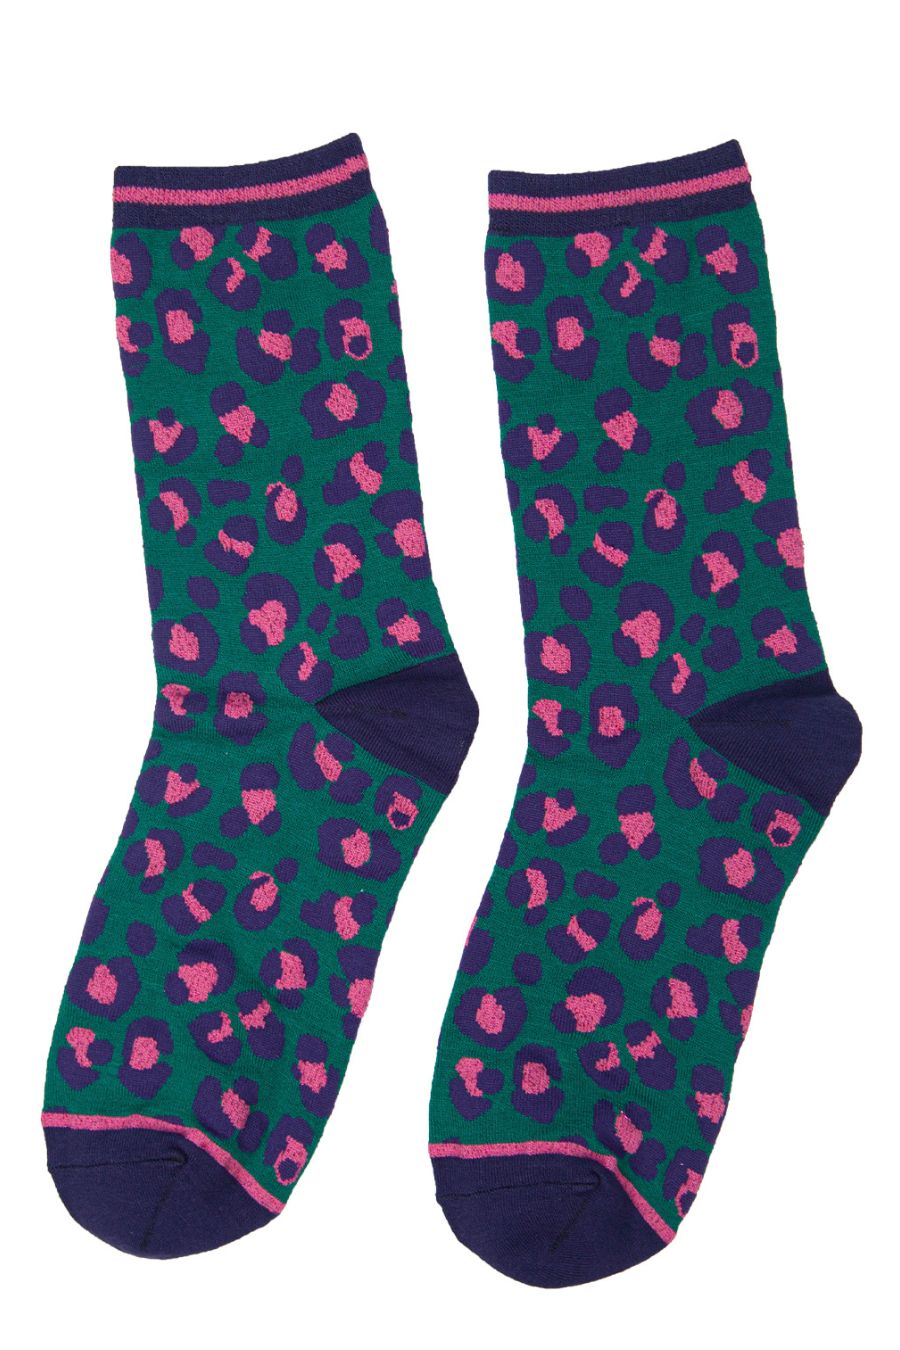 green bamboo ankle socks with an all over pink animal print